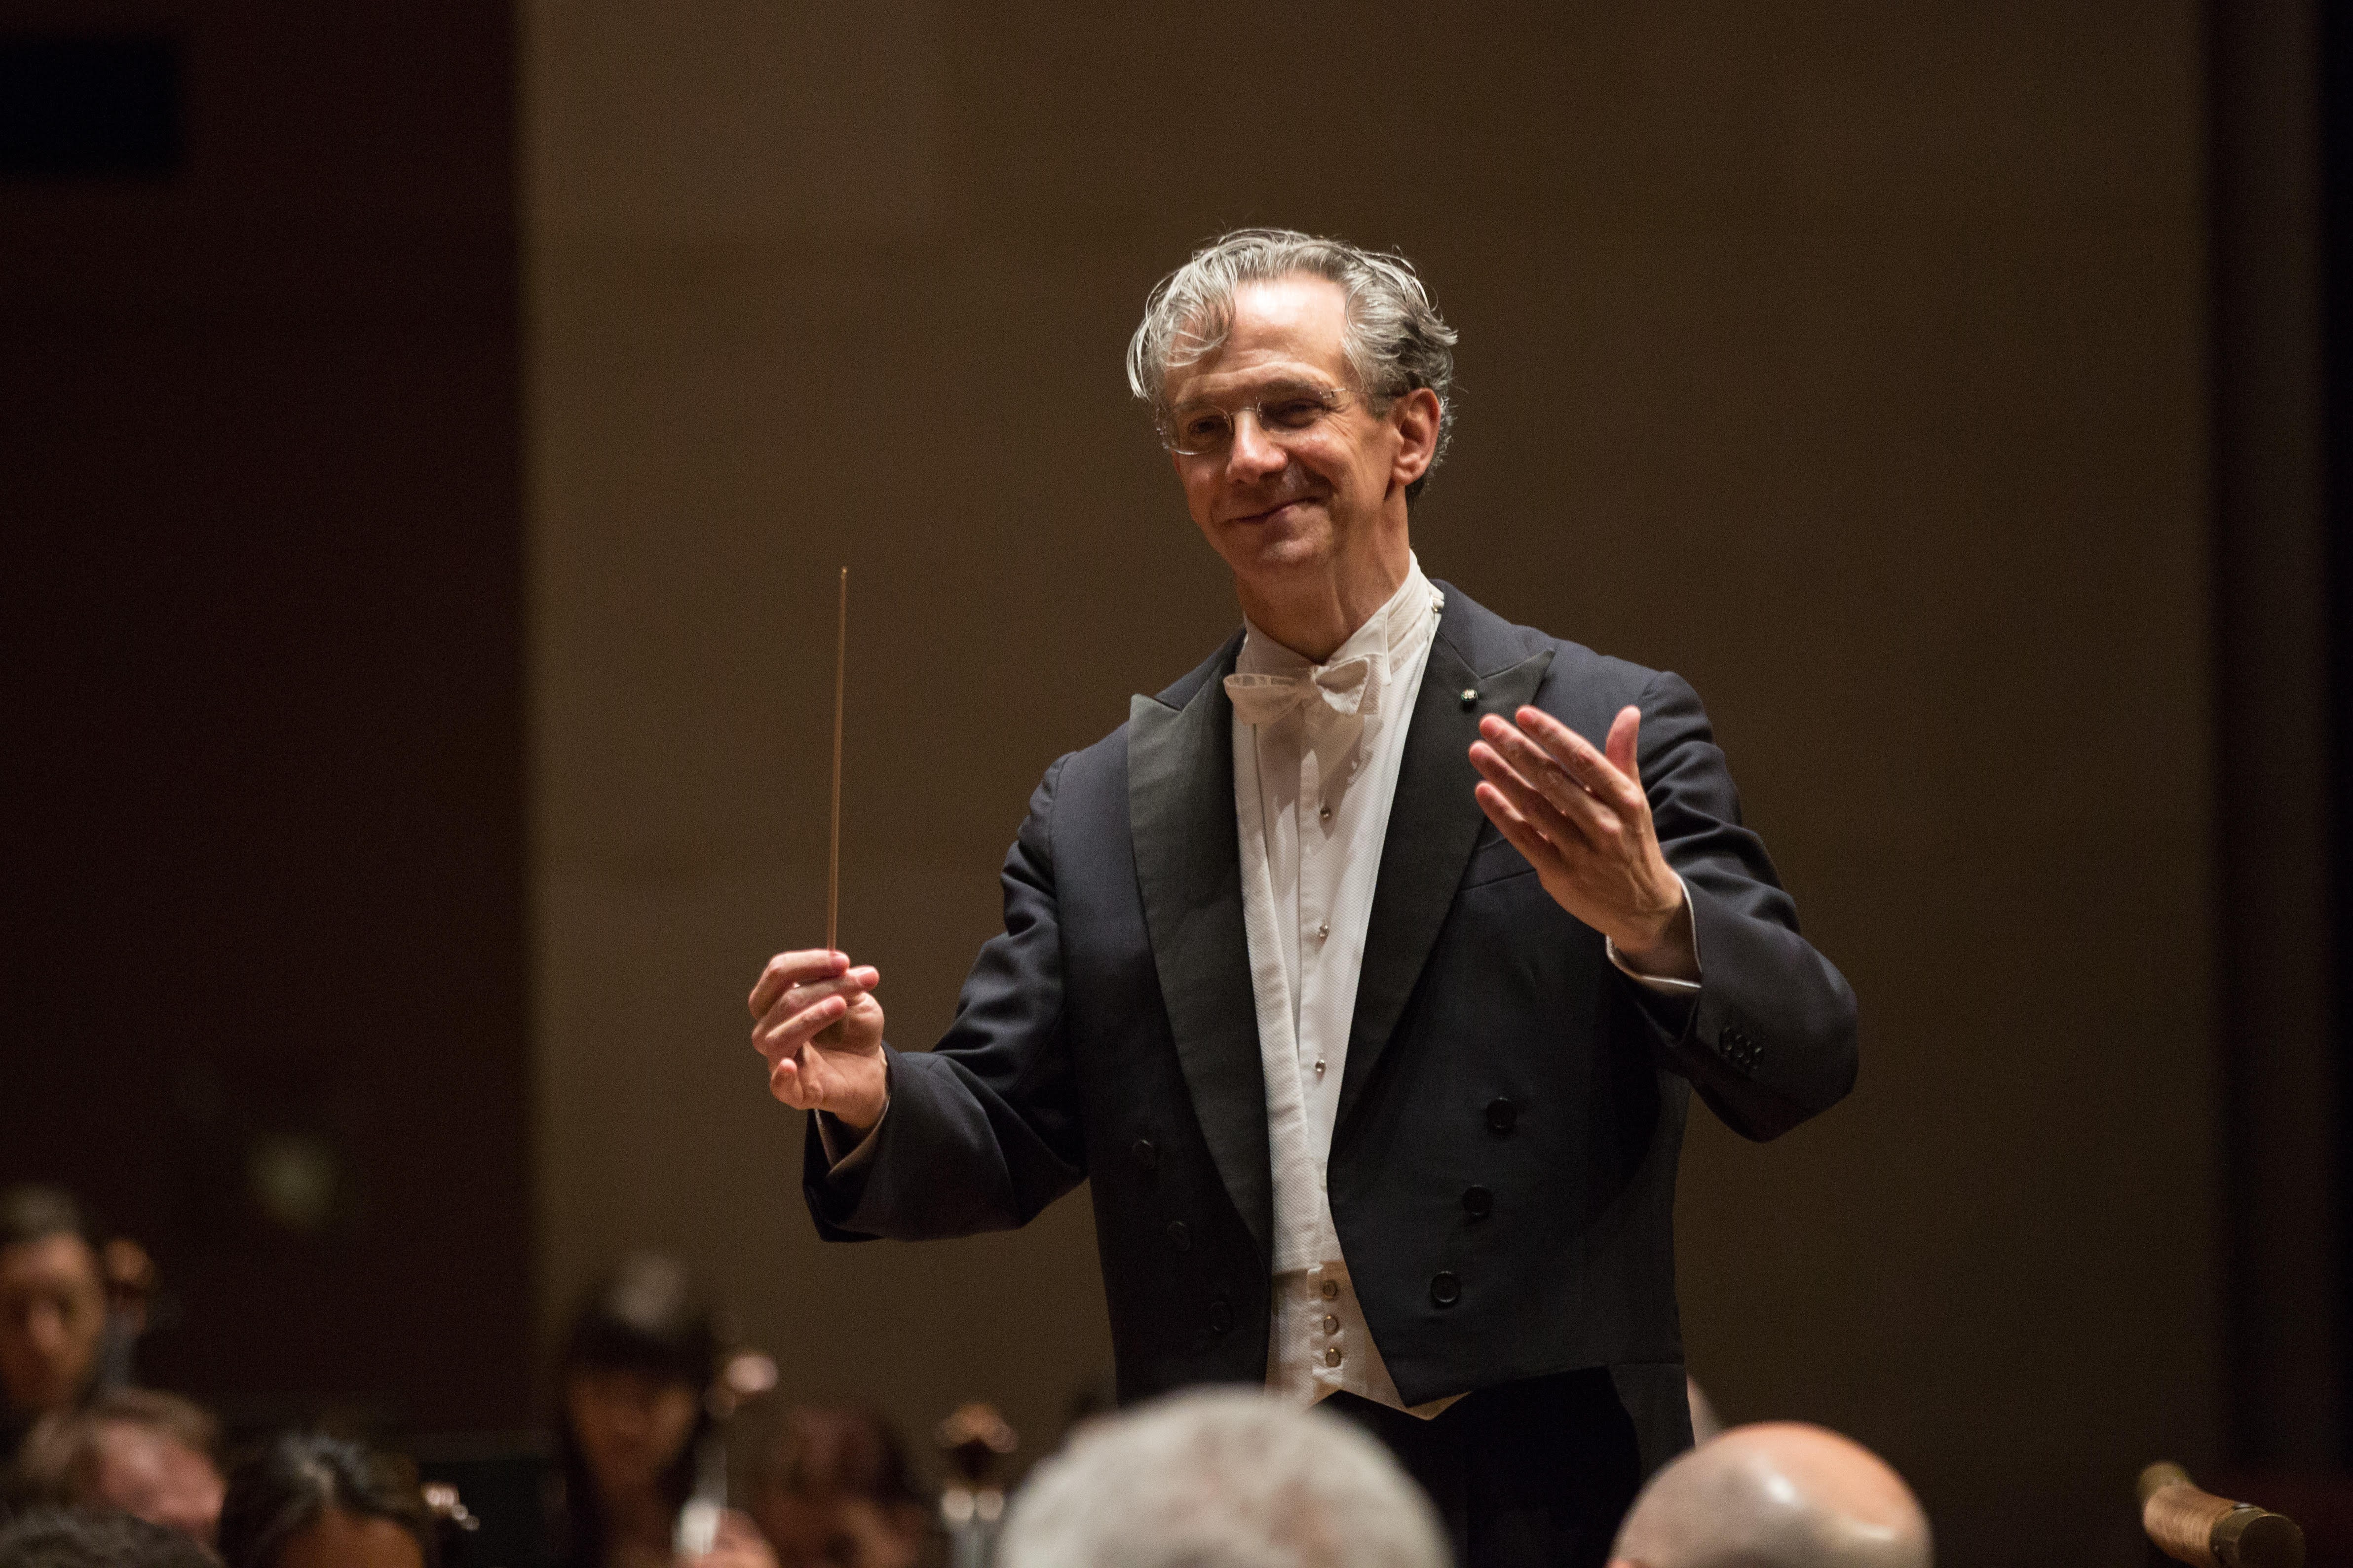 Symphony Orchestra Opens Exciting New Chapter With Fabio Luisi | Dallas Observer